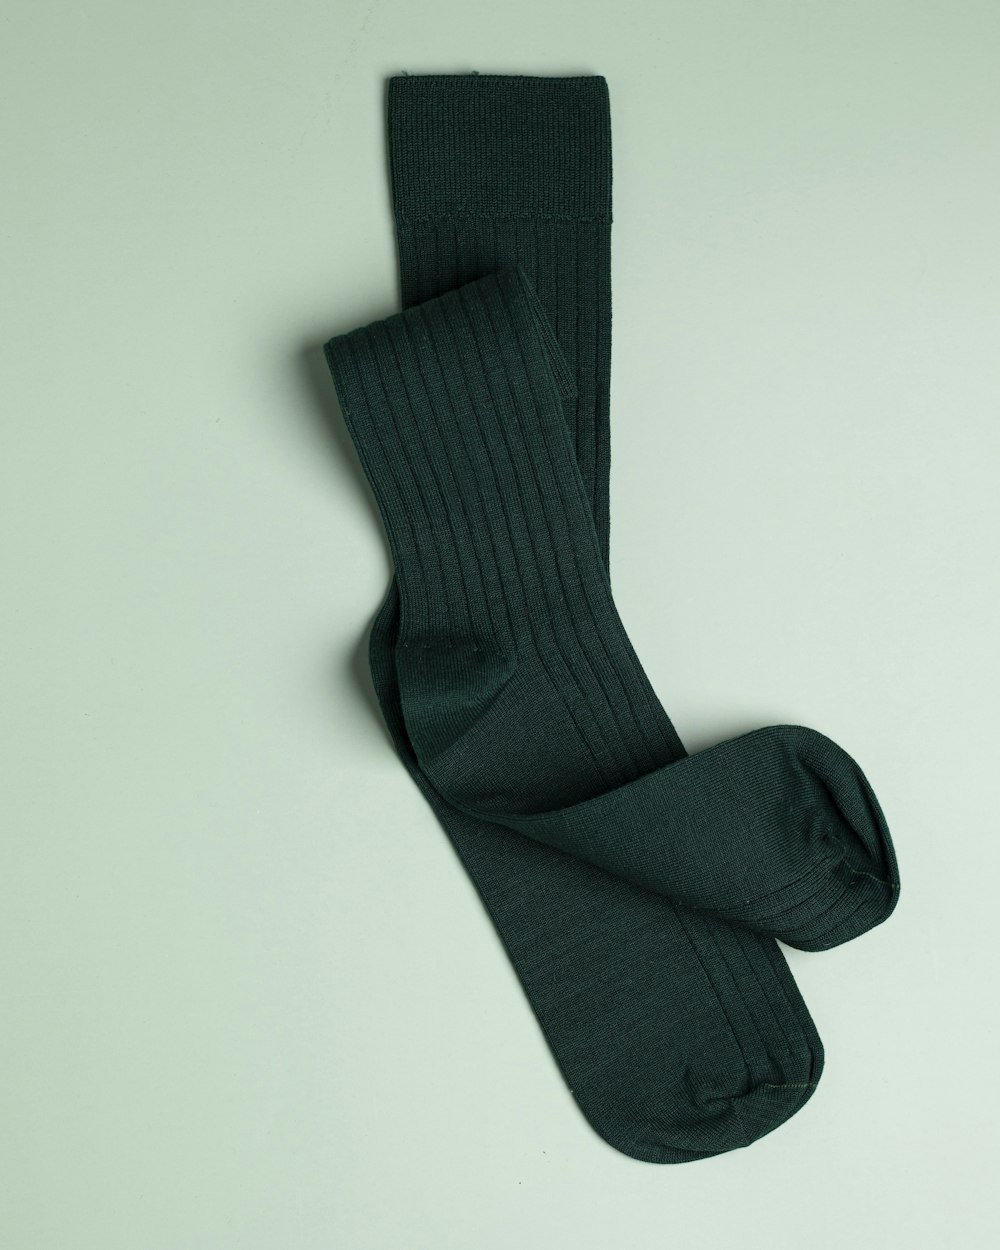 a pair of green socks laying on top of a white surface